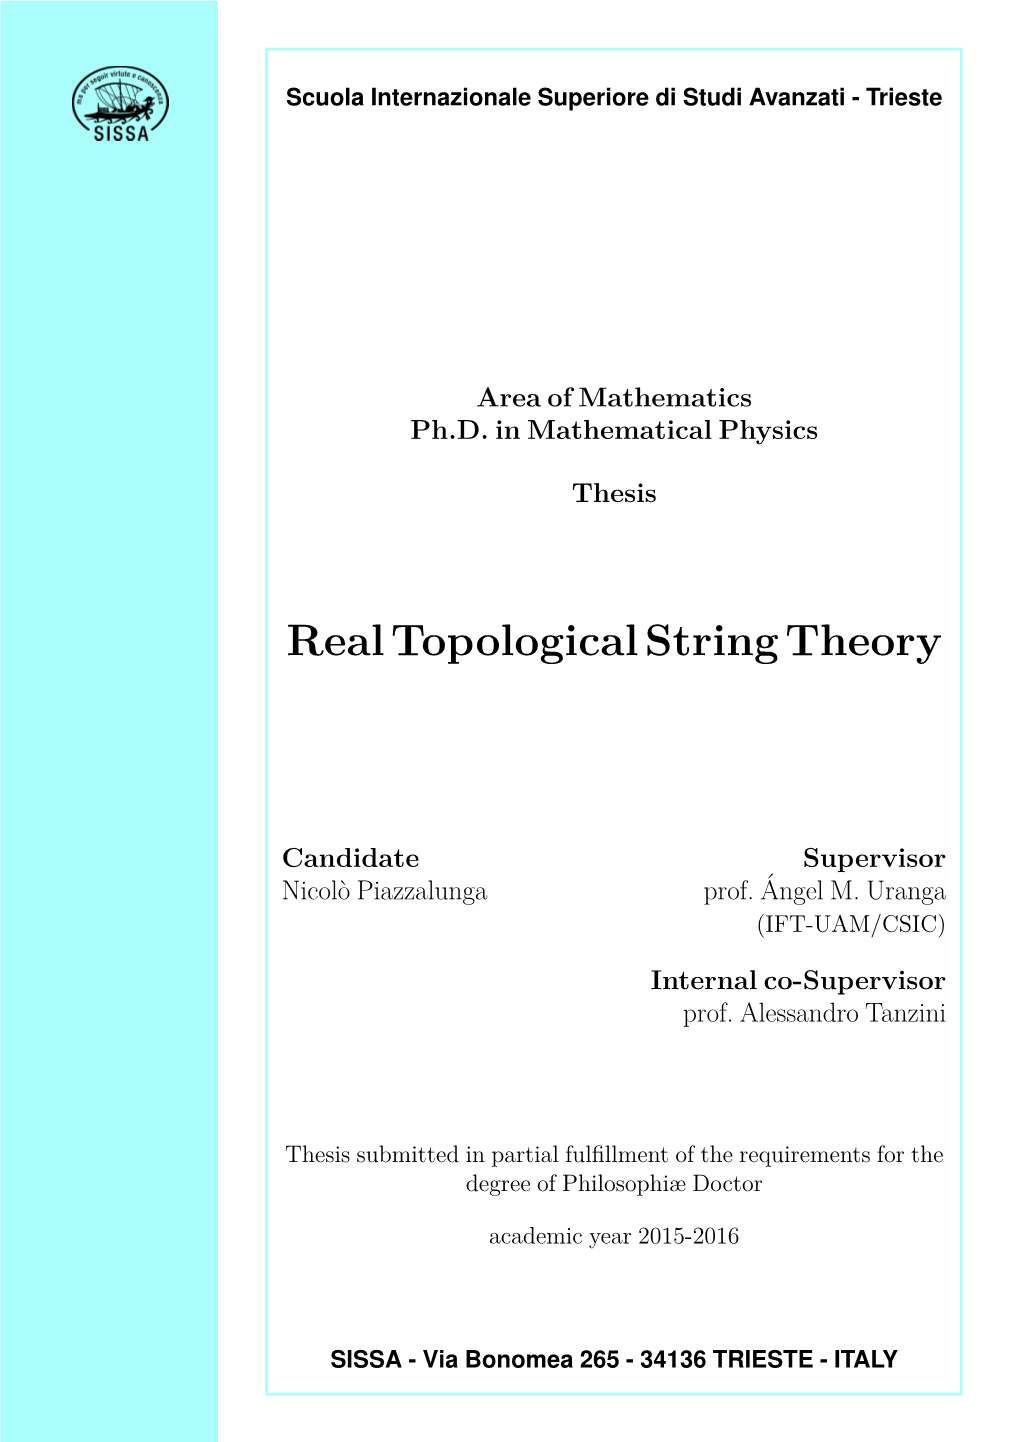 Real Topological String Theory